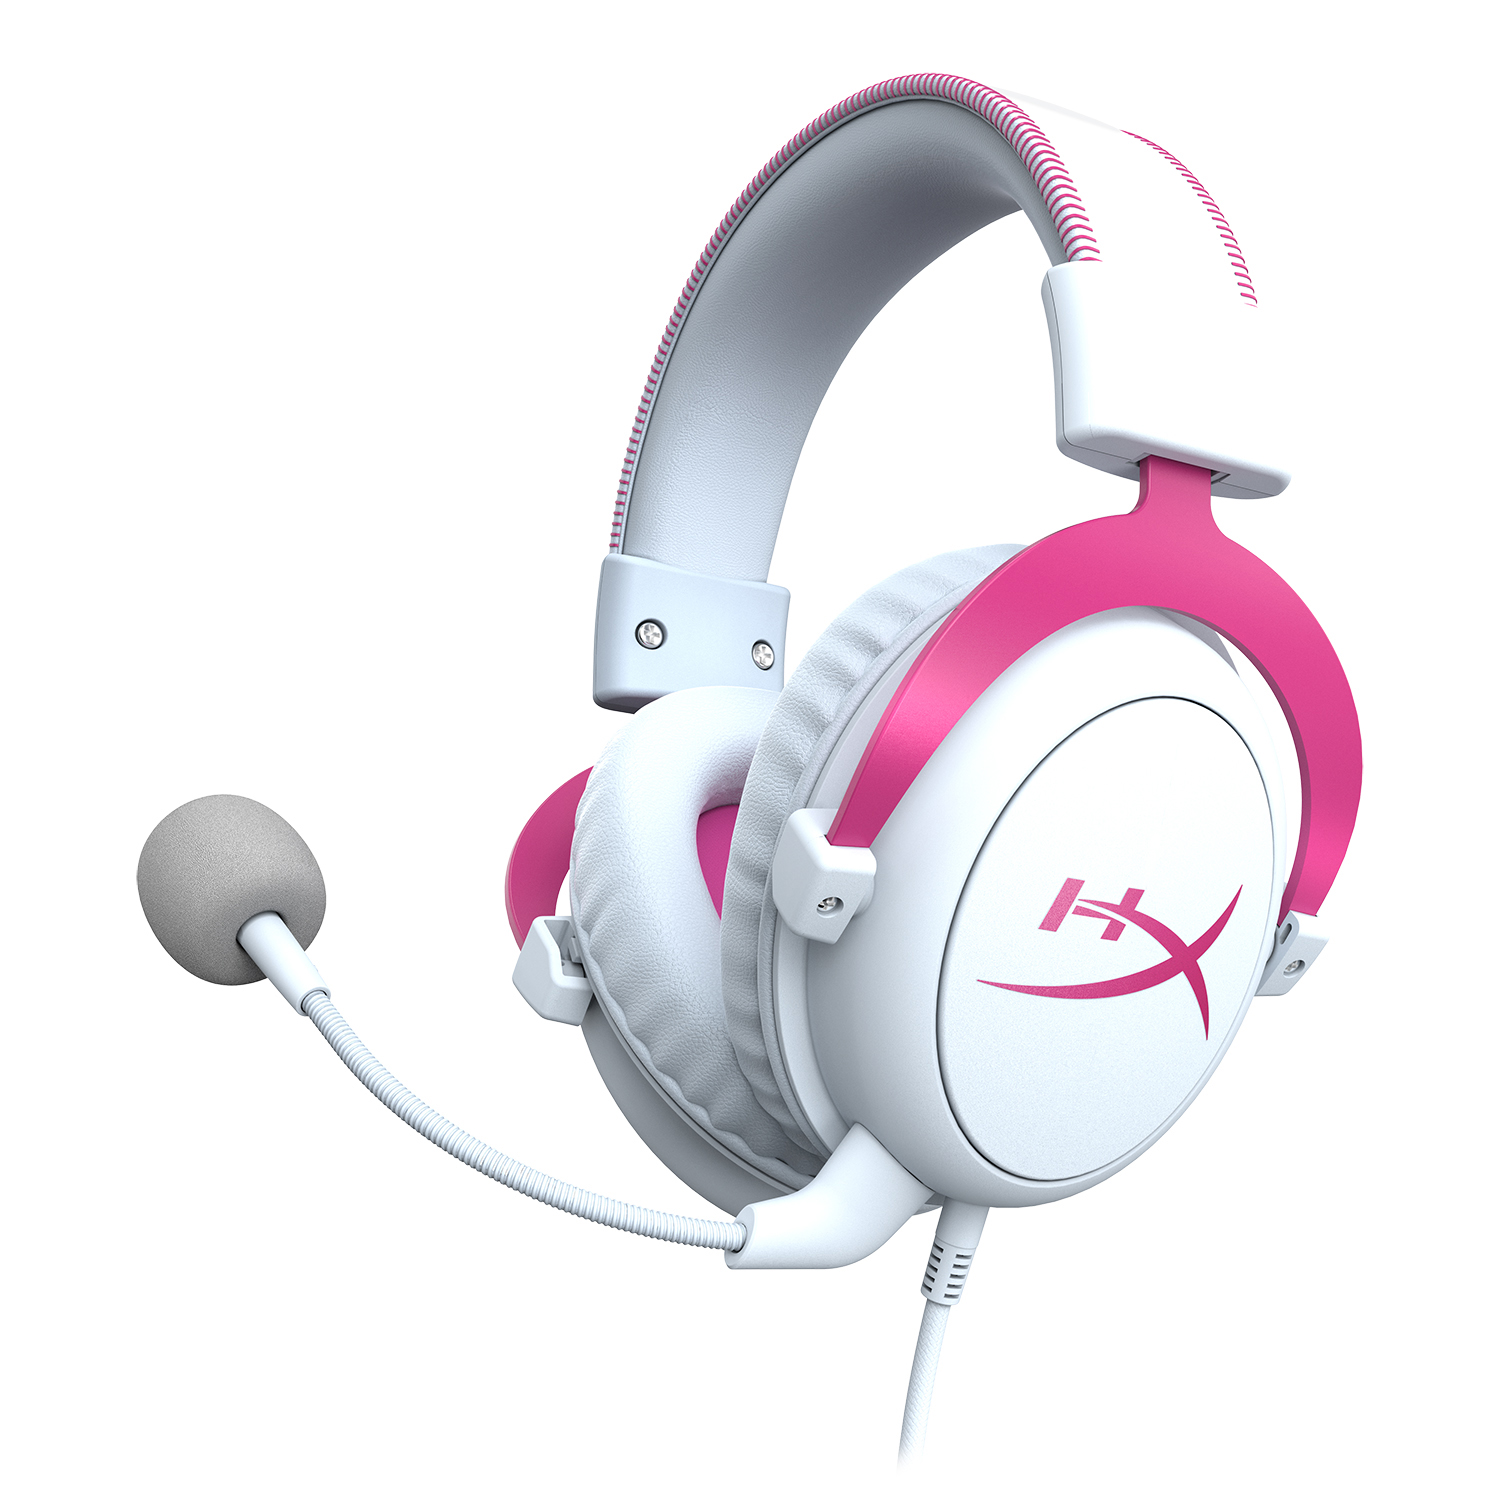 HyperX Cloud II Gaming Headset: New colourful headset introduced with an  audio control box and 7.1 virtual surround sound -  News